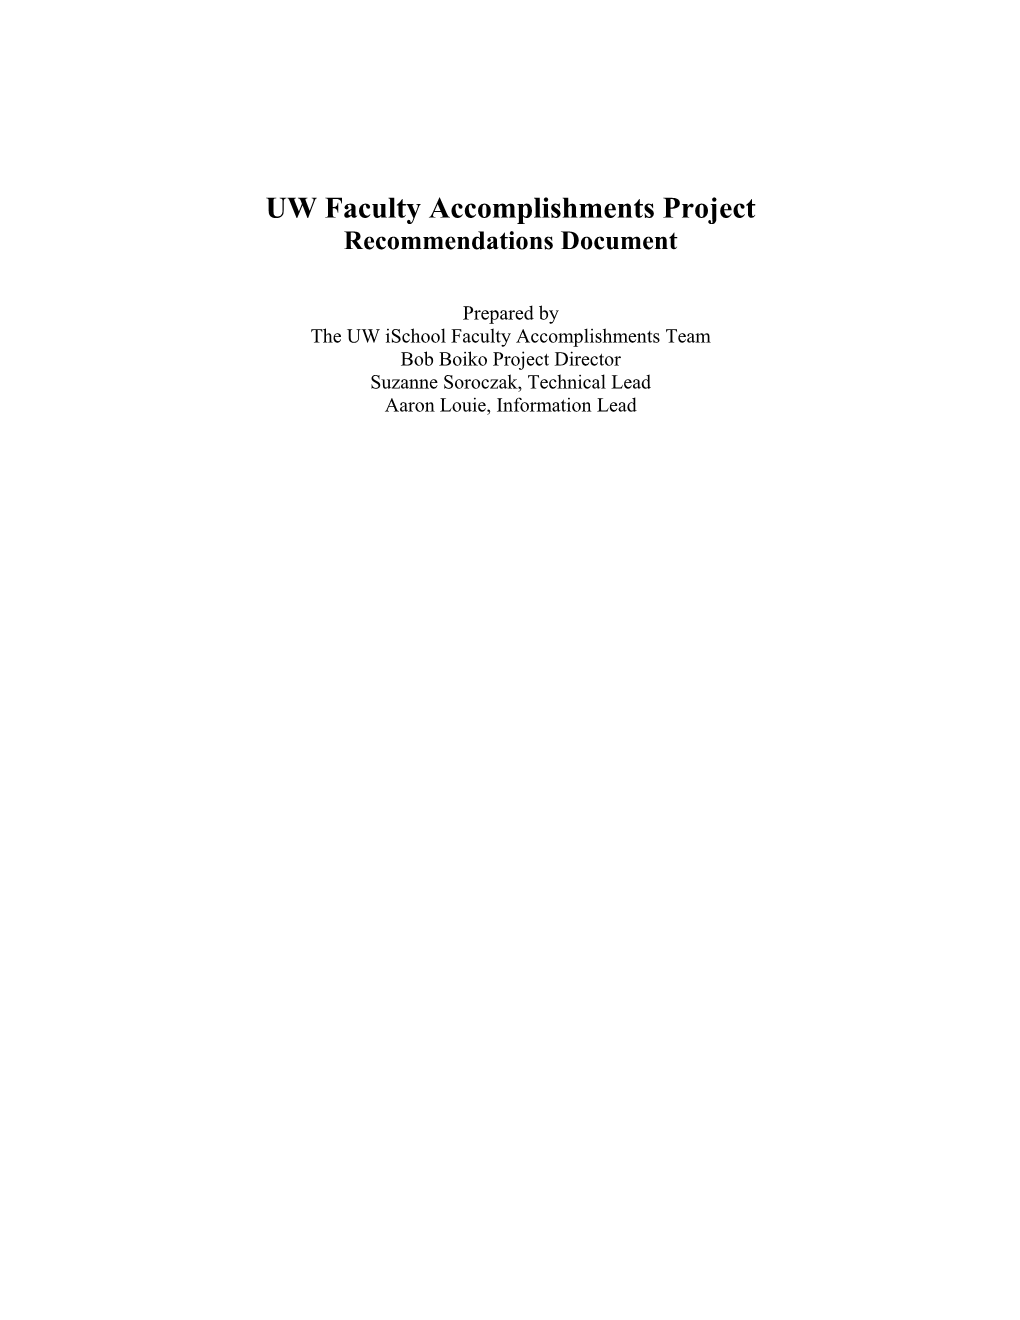 UW Faculty Accomplishments Project